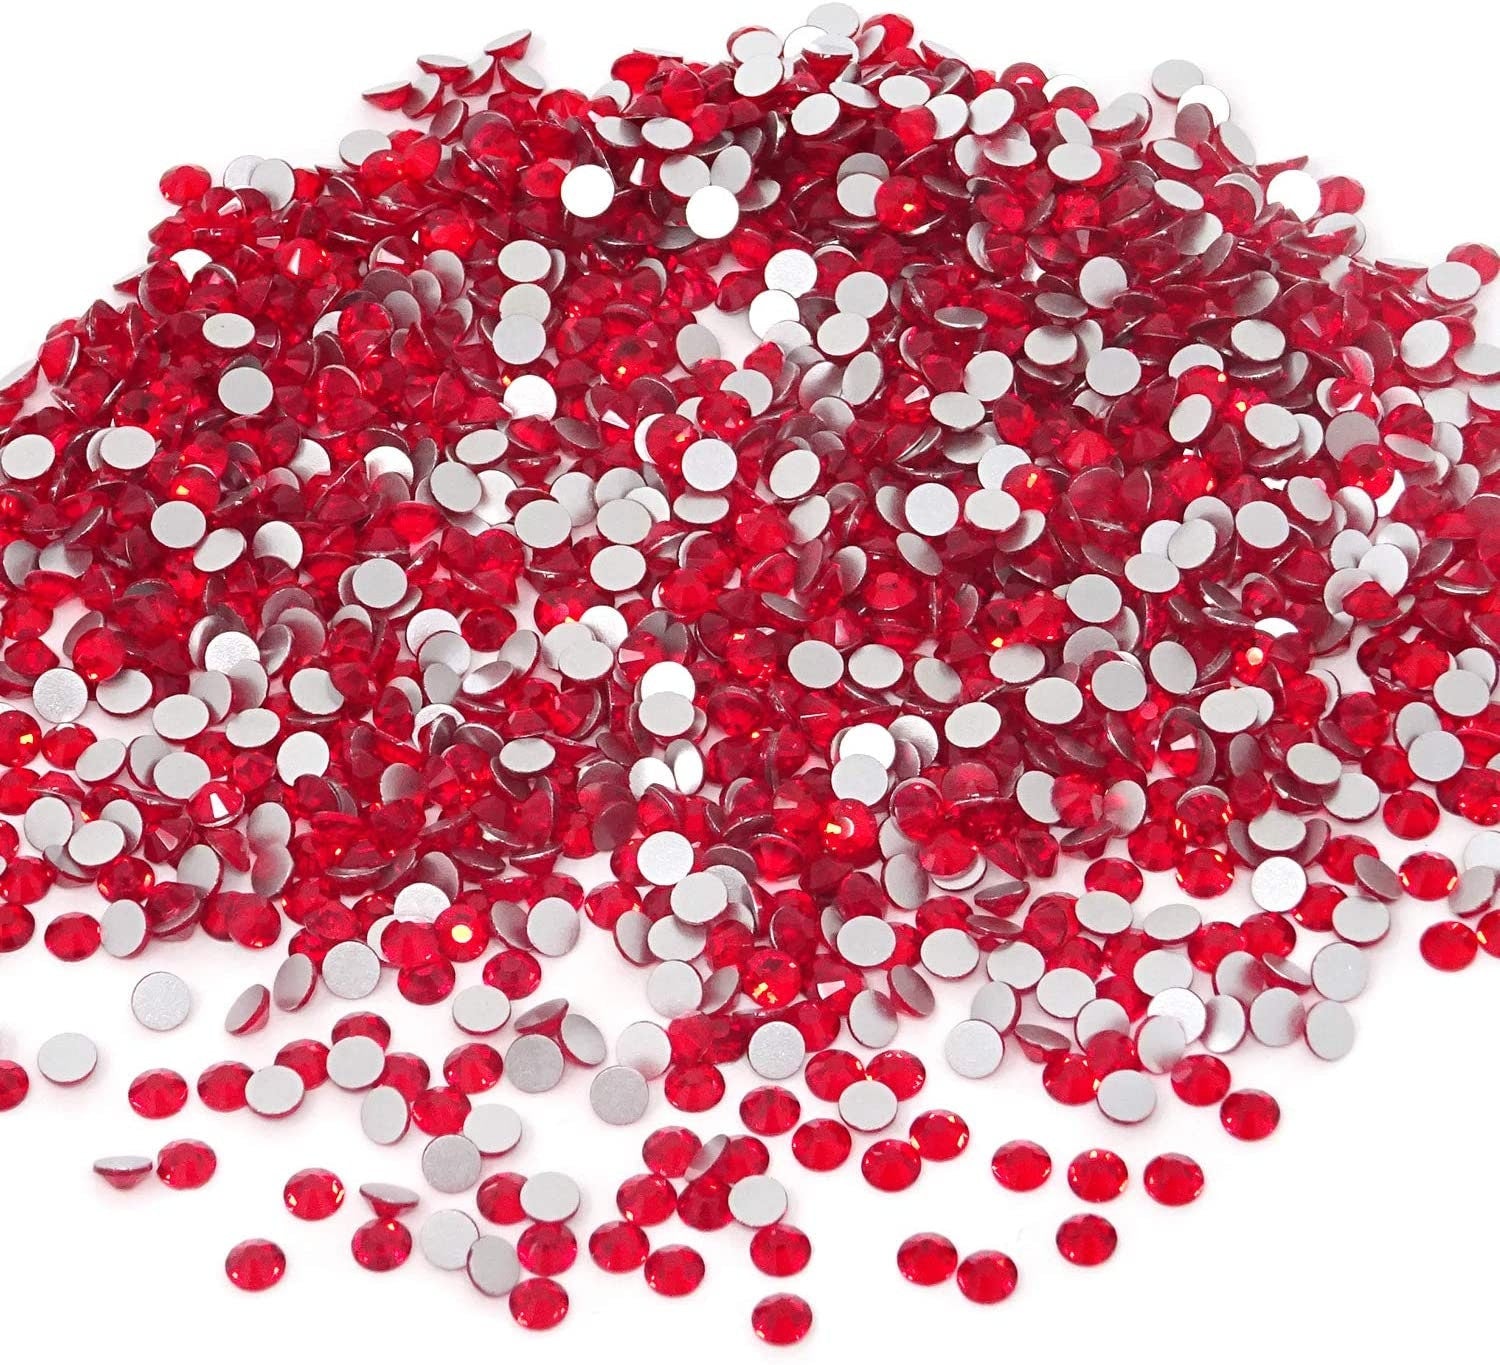 Glass Rhinestones "RED" Non-Hotfix, Sizes SS6 - SS30, Faceted Rhinestone Crystals, Round FlatBack Glass (1440), Periciosa Stones